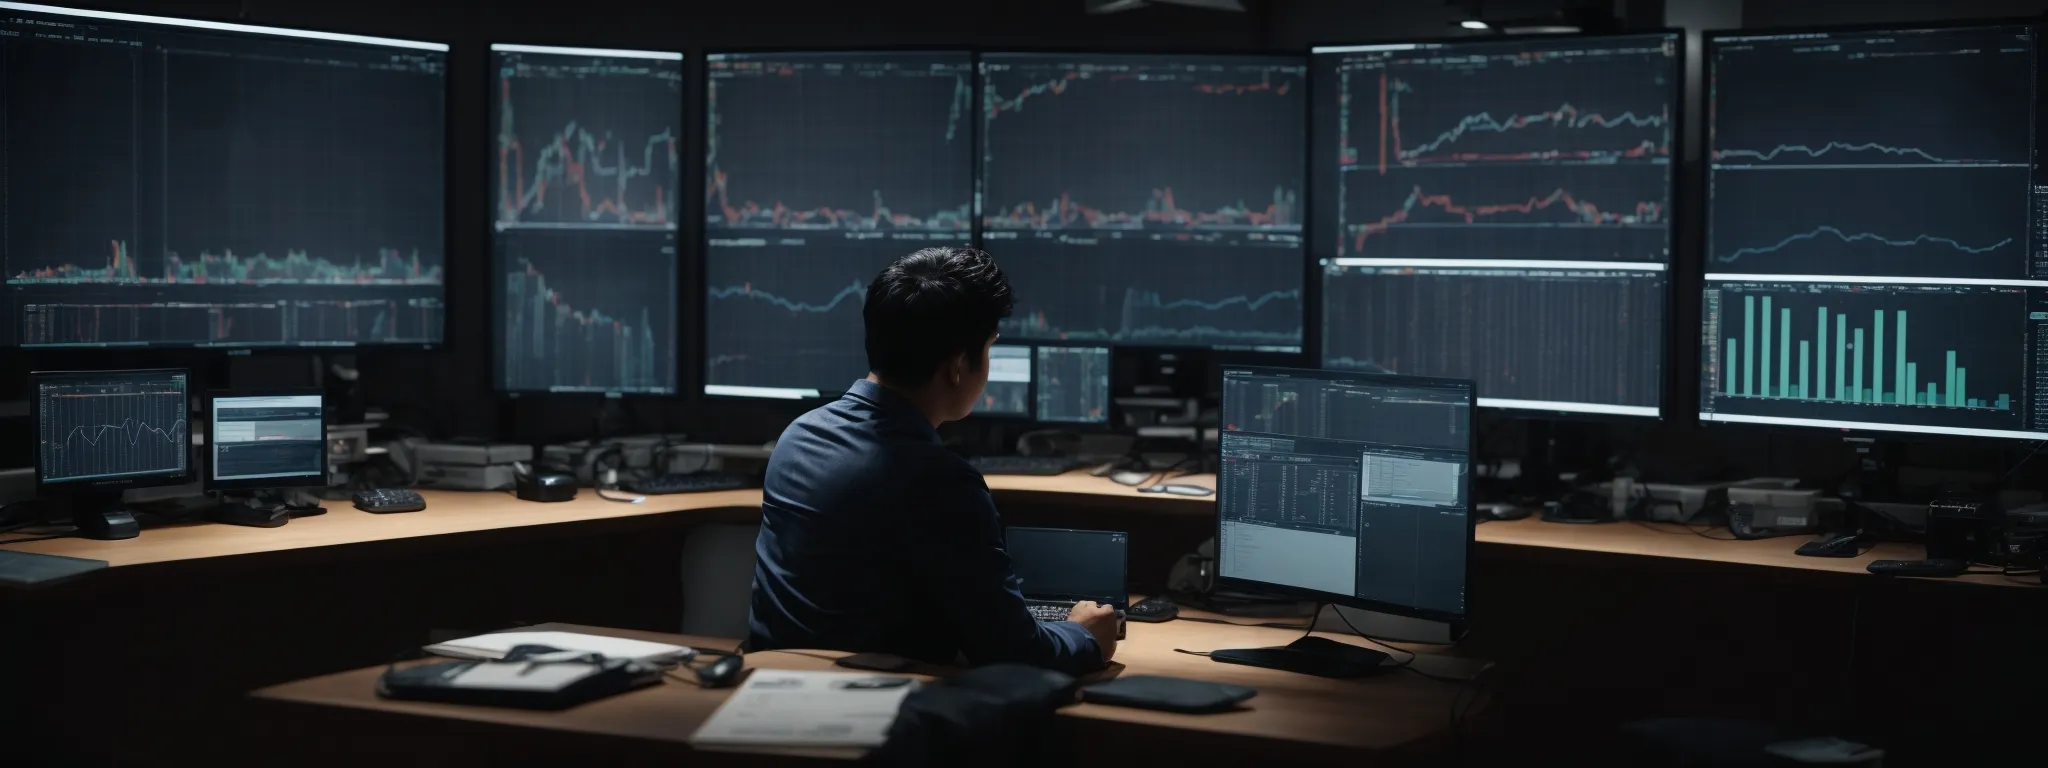 a person sits before multiple computer screens analyzing graphs and charts related to search engine data distribution.